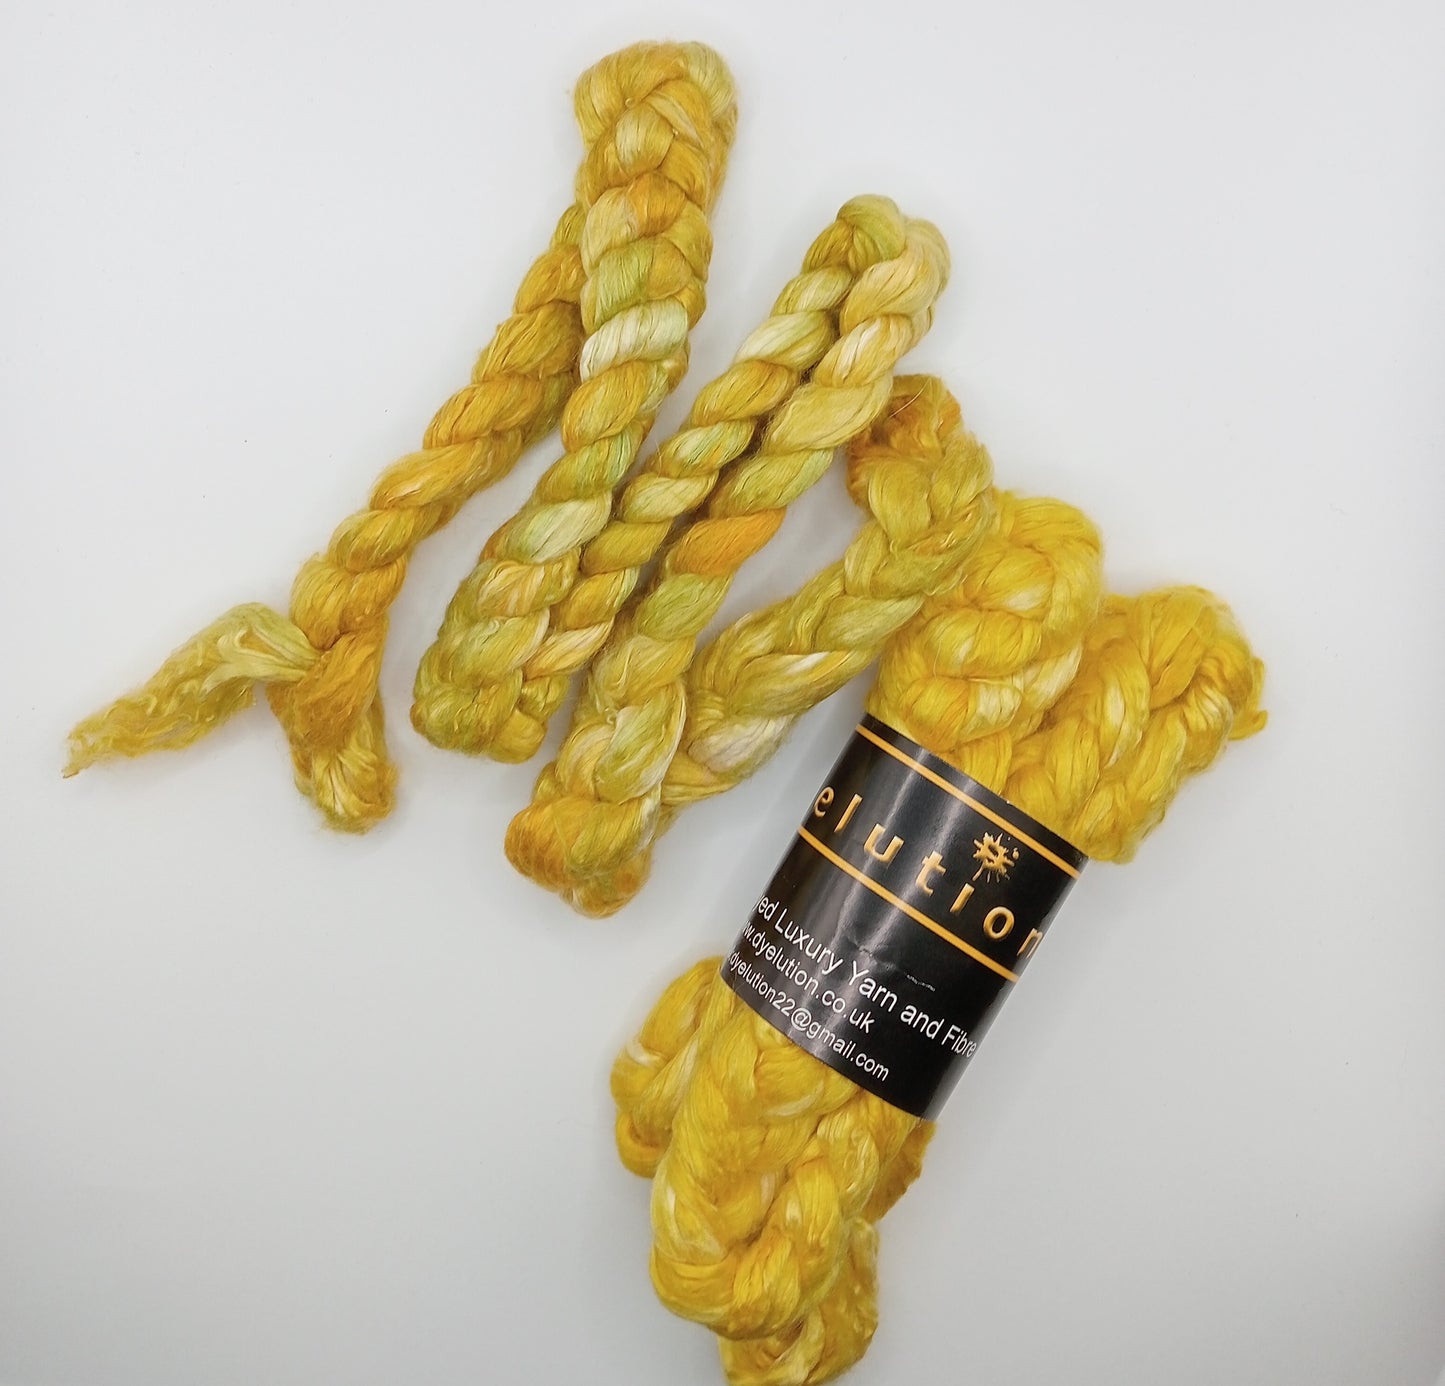 50G 'A' Grade Pure Mulberry Silk- "Sunflower Yellows" Hand Dyed Luxury